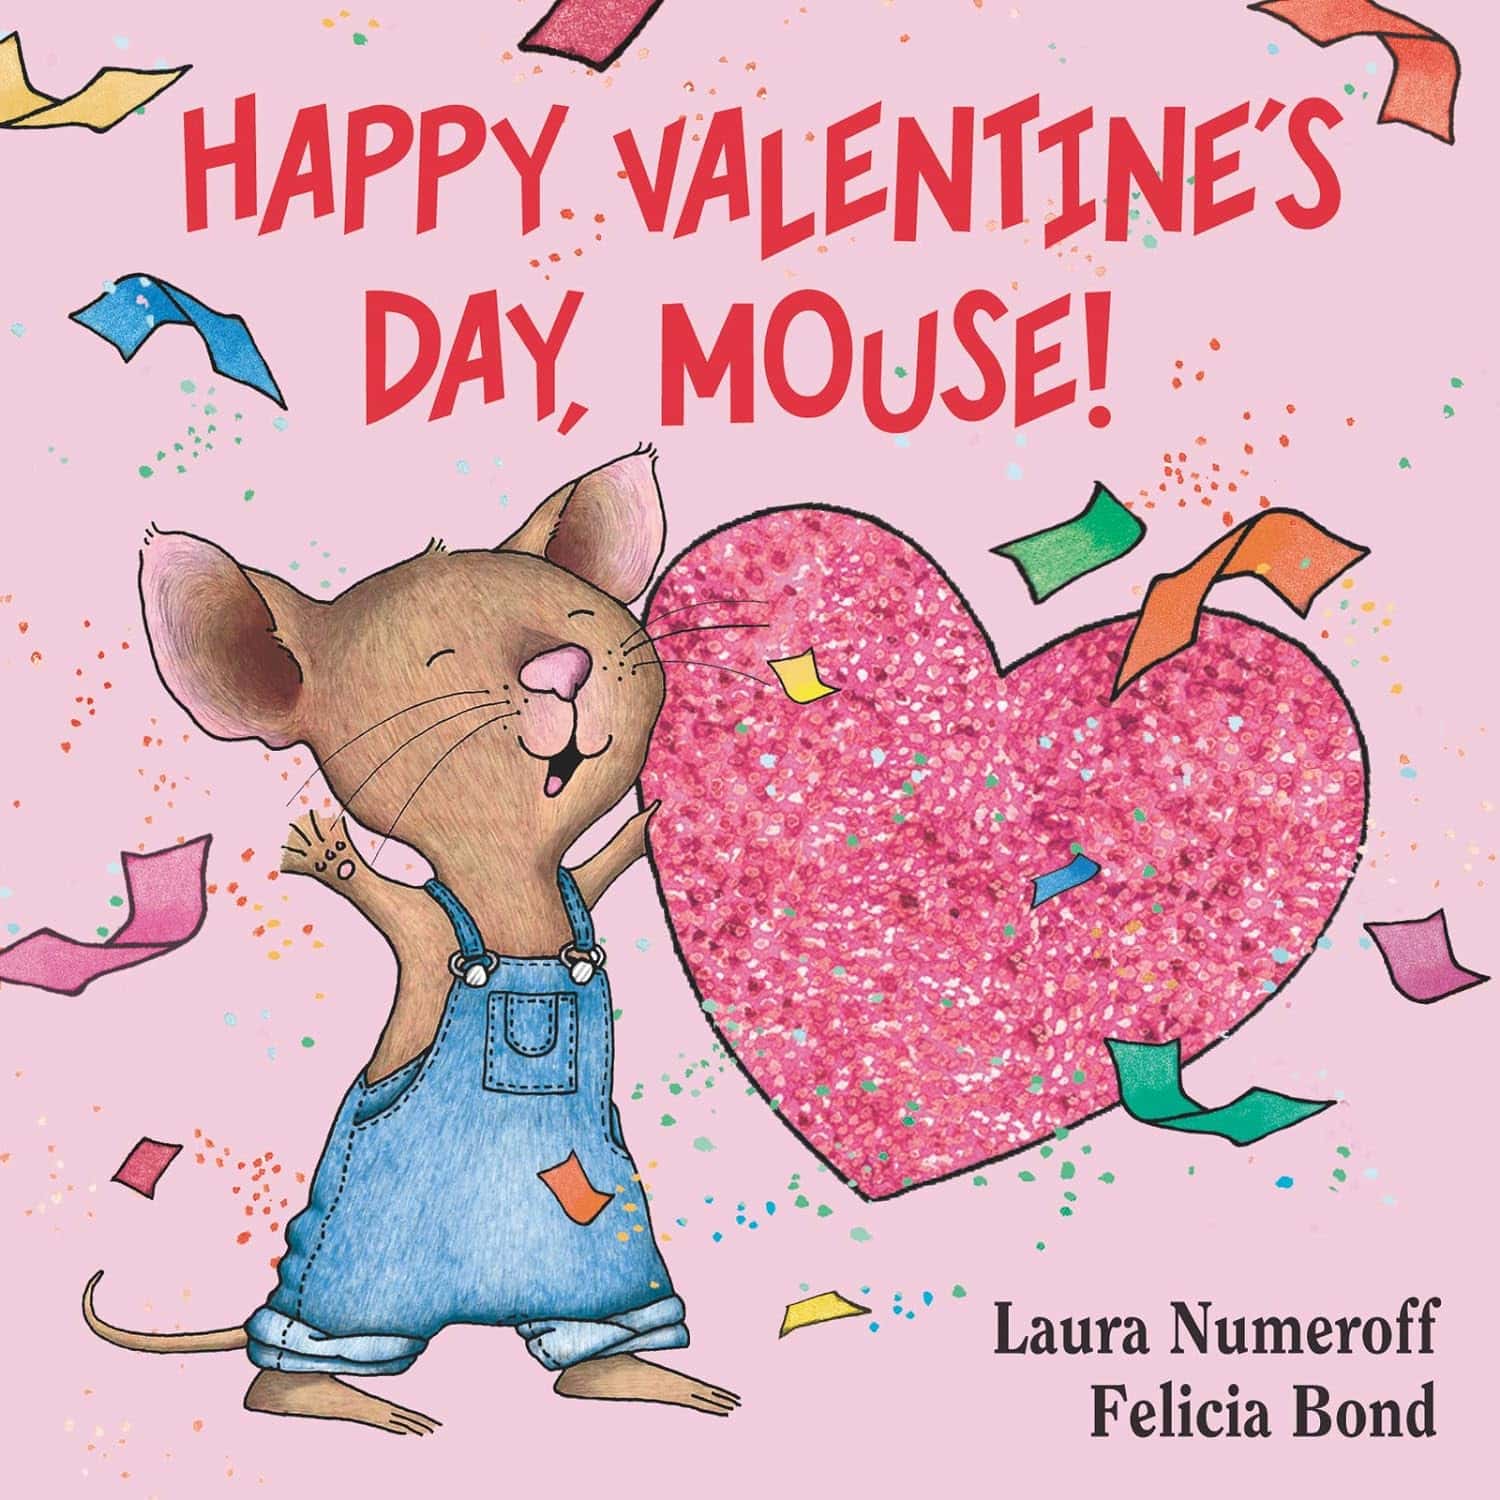 "Happy Valentine's Day, Mouse!" by Laura Numeroff